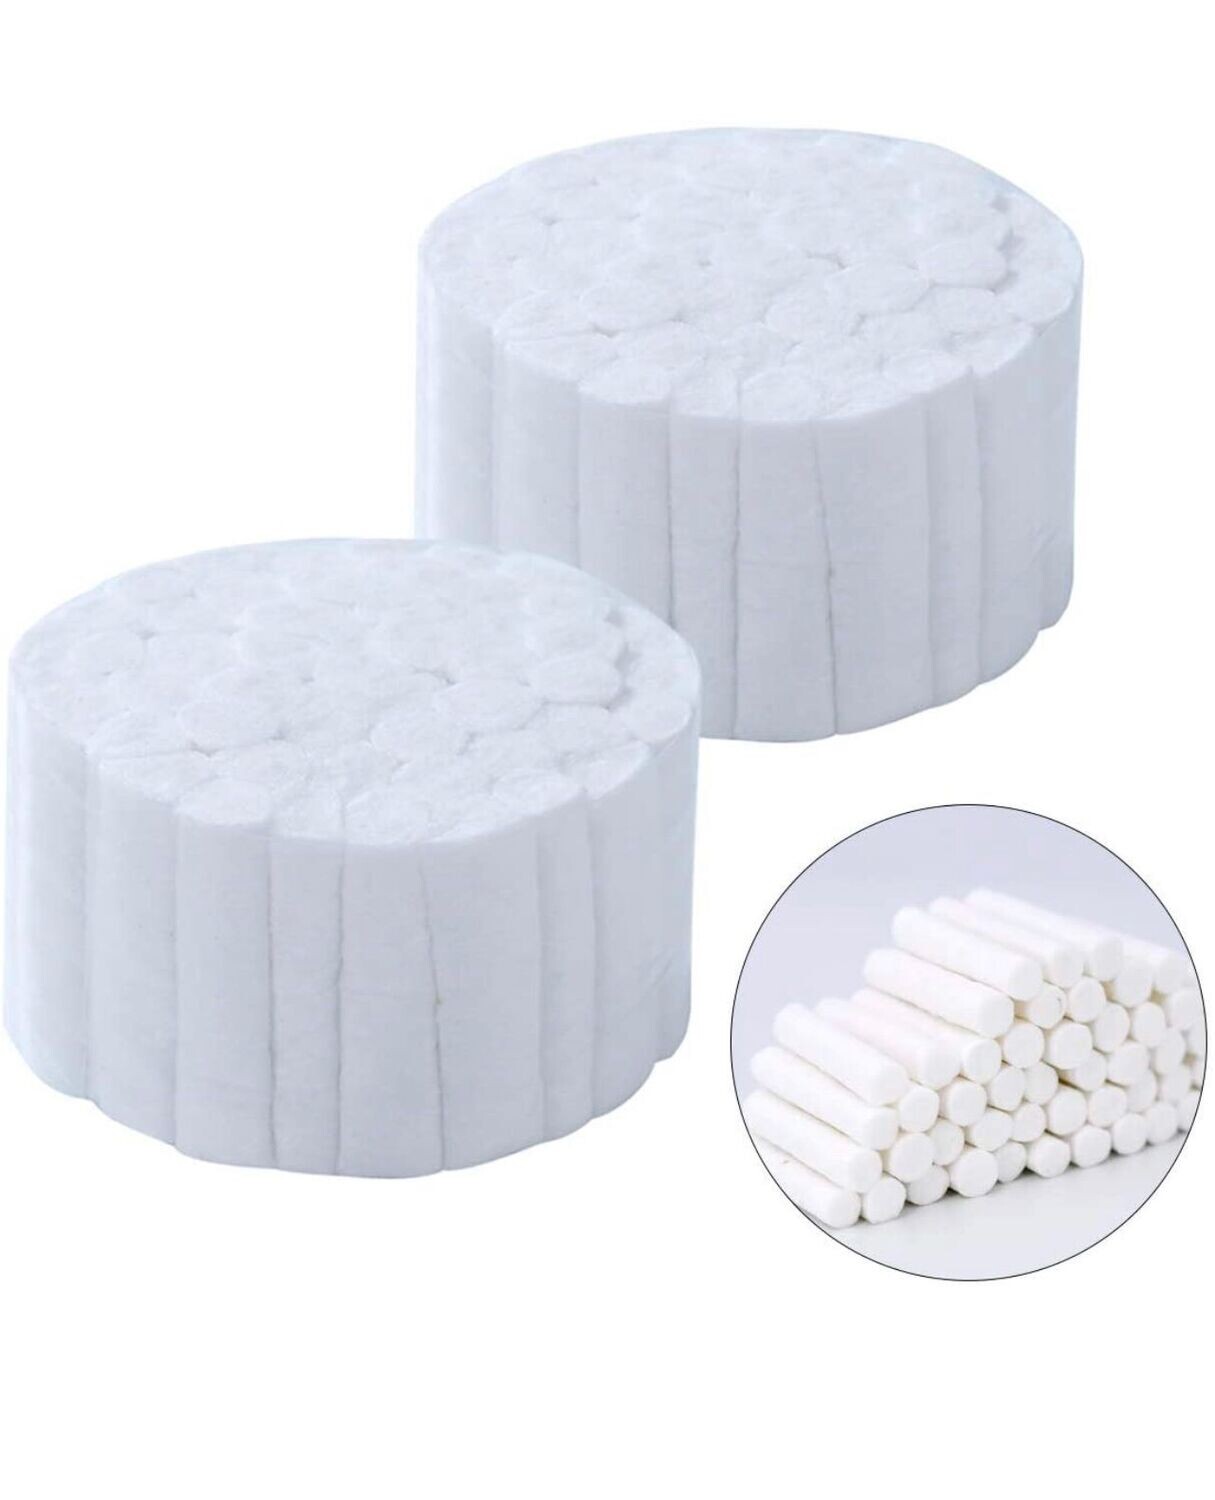 DENTAL COTTON ROLL (2 PACK)